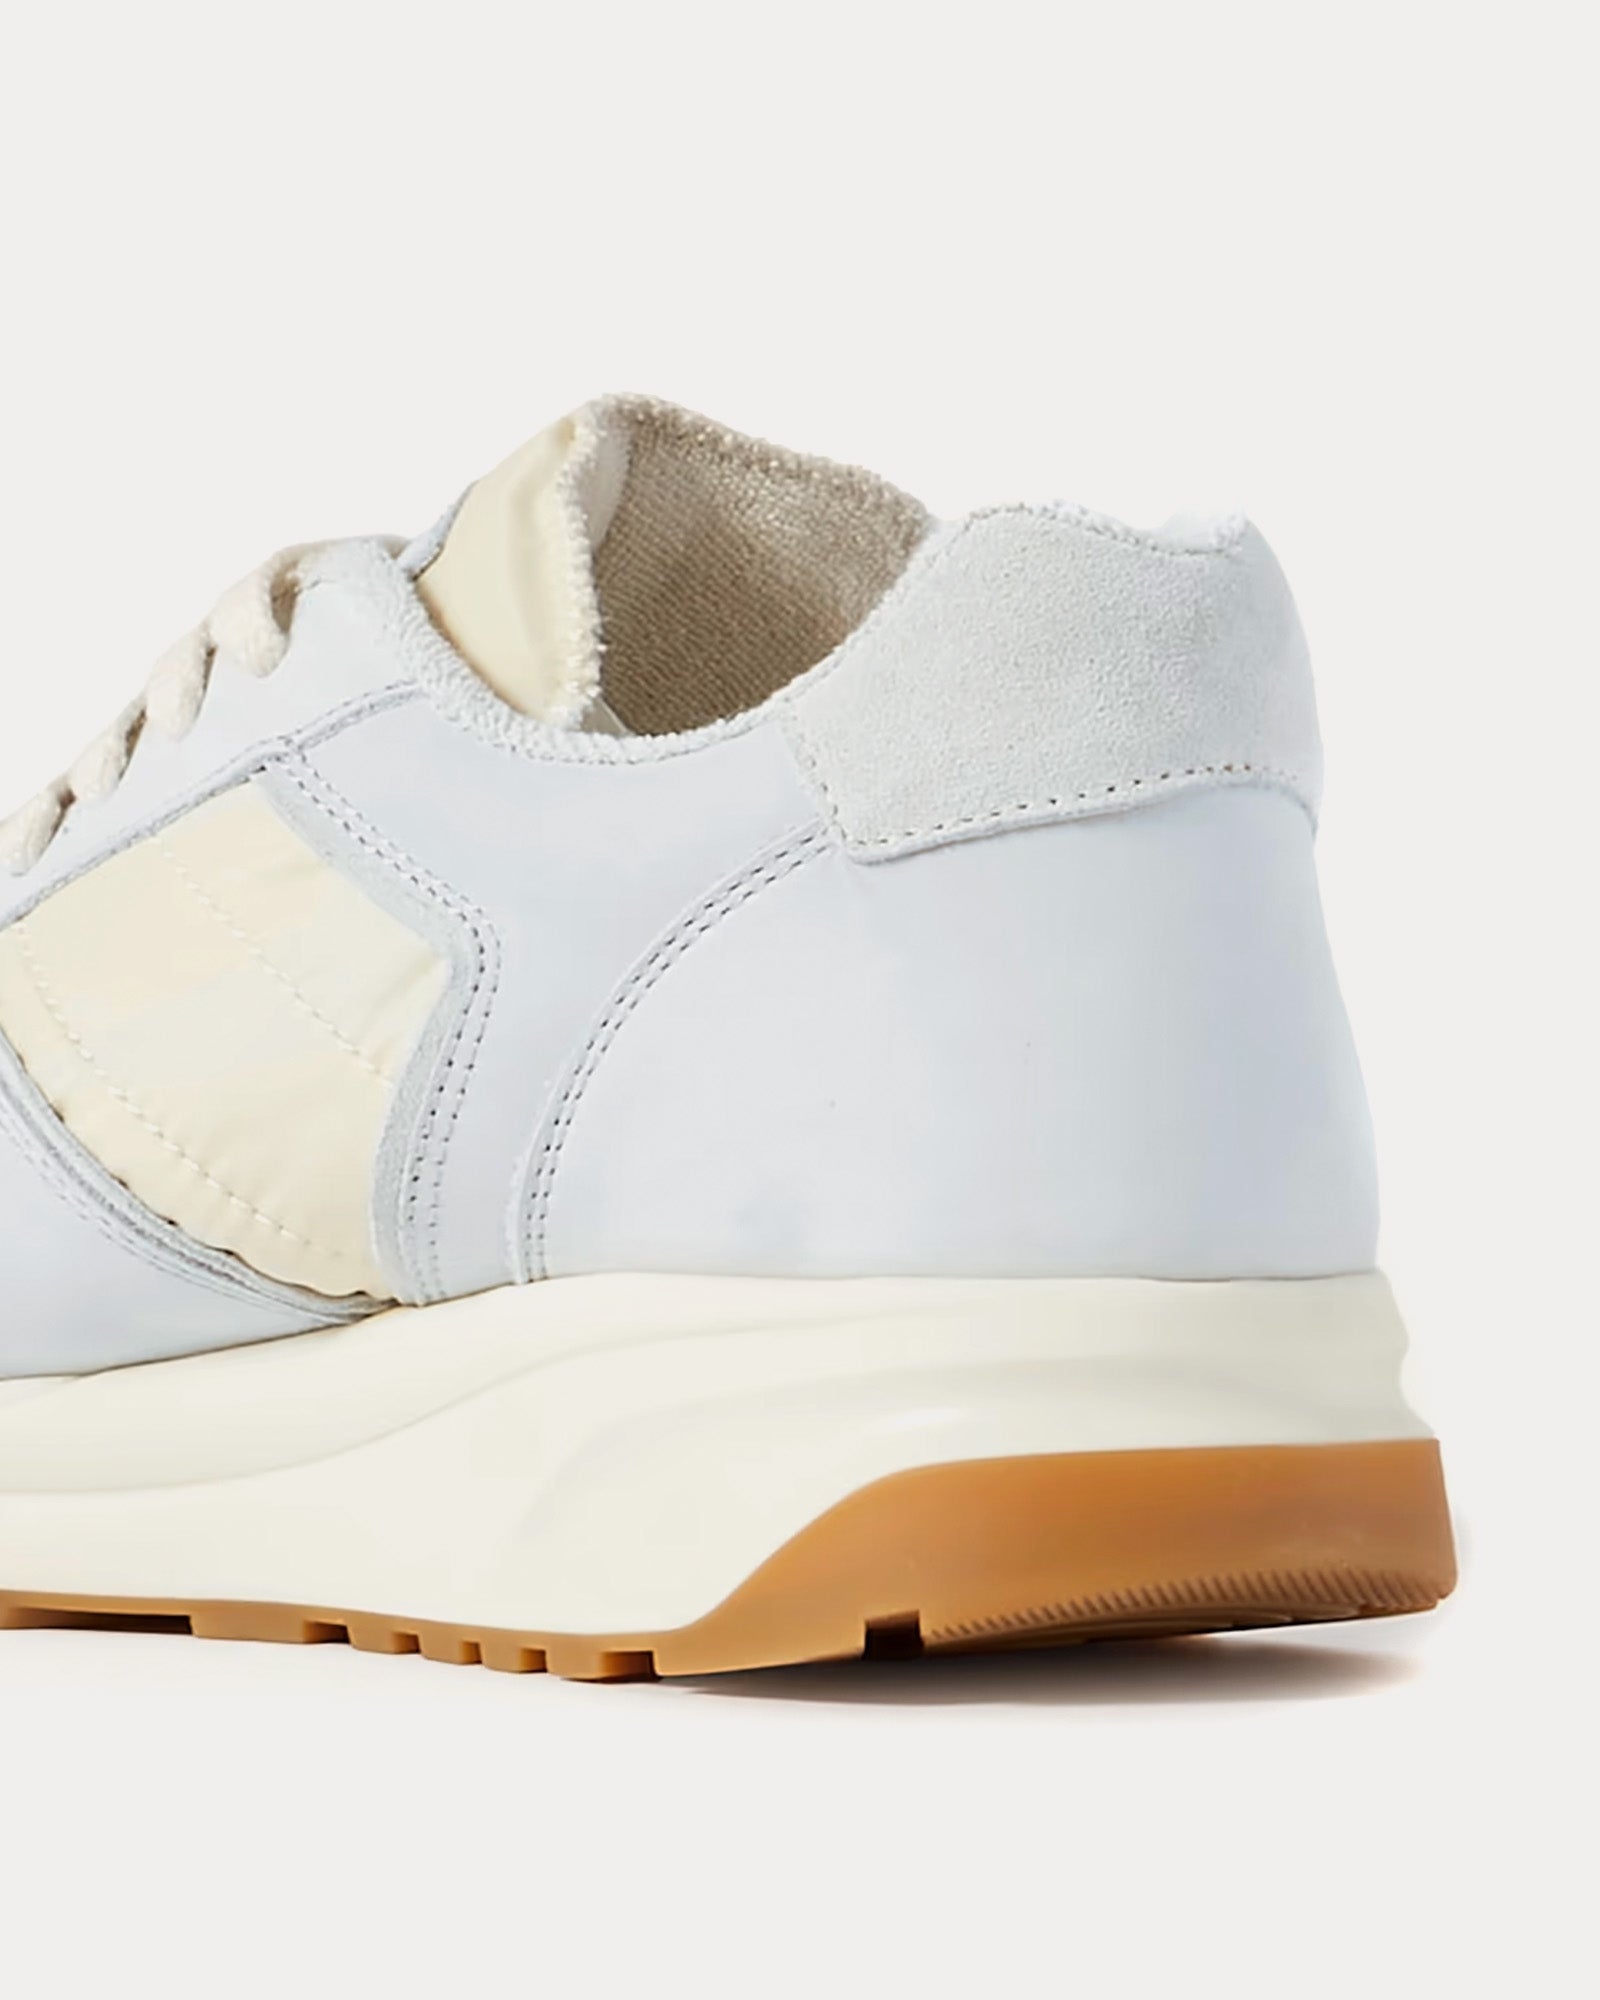 Common Projects - Track SS24 Light Blue / Light Grey Low Top Sneakers